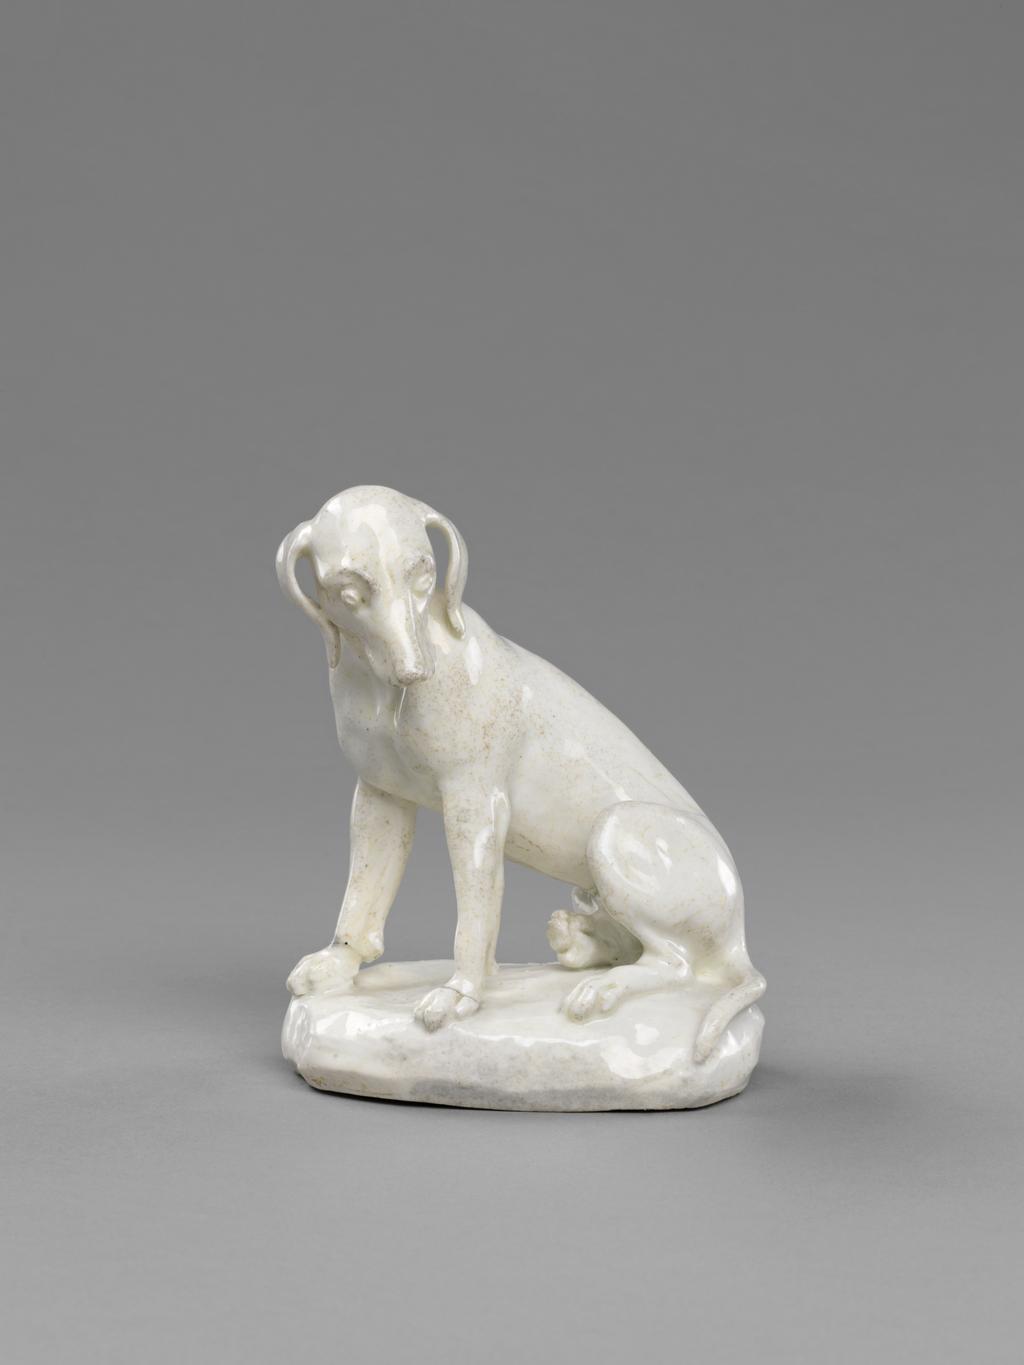 An image of Animal figure. Dismal Hound. Probably made by Charles Gouyn of St James's, London. The unglazed underside has a large oval opening, leaving a flange round the edge. The hound bitch sits on an oval, low mound base with its front paws apart and its head turnned to its left, looking downwards. It has floppy ears and a lugubrious expression. Soft-paste porcelain, slip-cast and lead-glazed. The glaze is off-white and very speckly. Height, whole, 12.5 cm, length, whole, 10 cm, circa 1749-1759. Rococo.